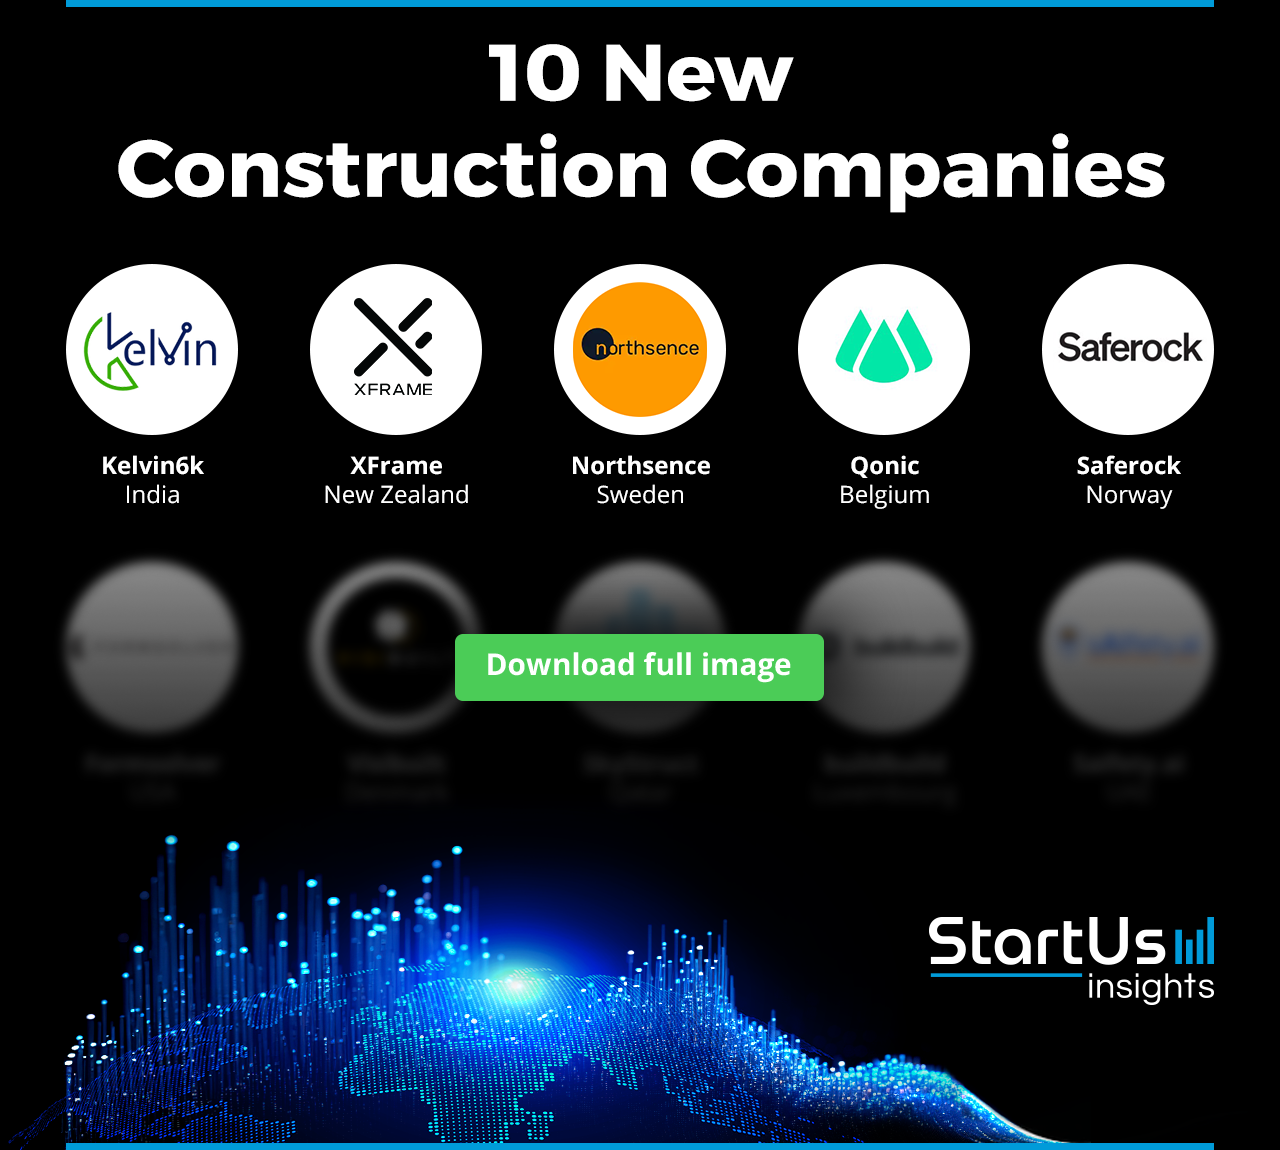 New-Construction-Companies-Logos-Blurred-StartUs-Insights-noresize